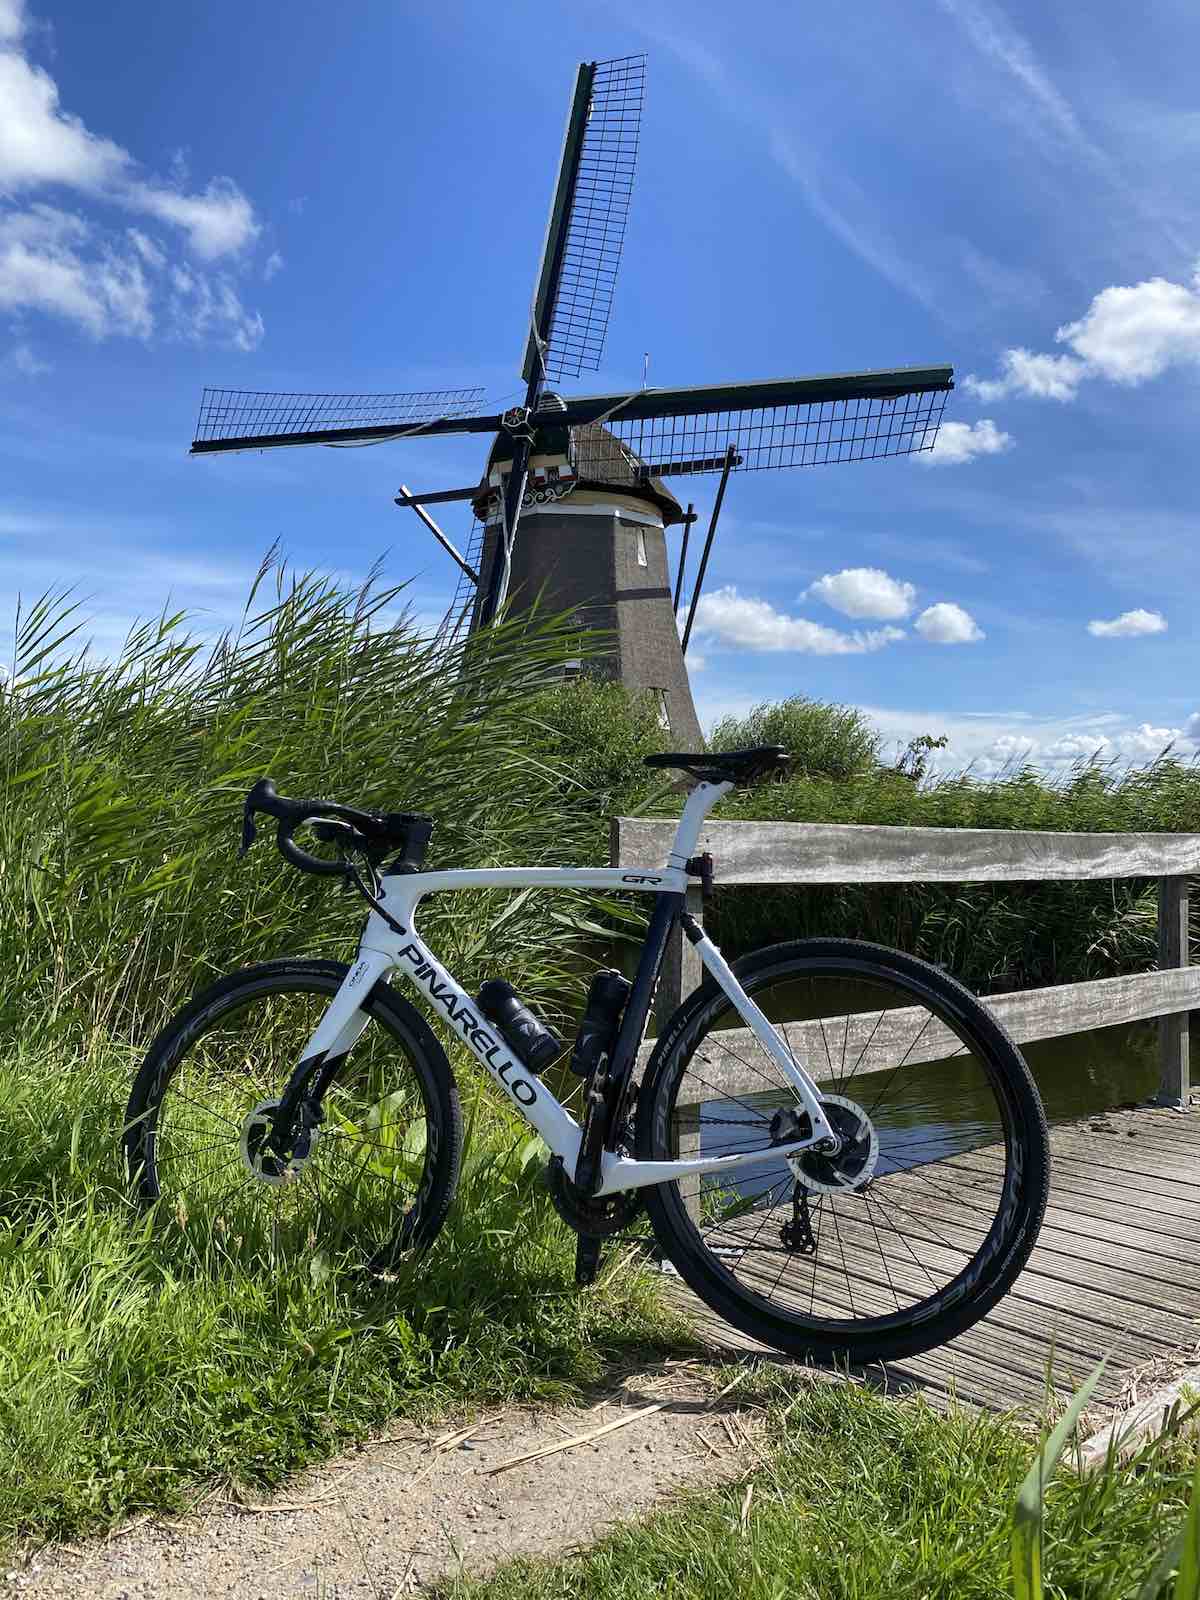 bikerumor pic of the day road bicycle leaning against a wooden bridge with high green grass on either side and a windmill in the distance with bright clear blue sky.